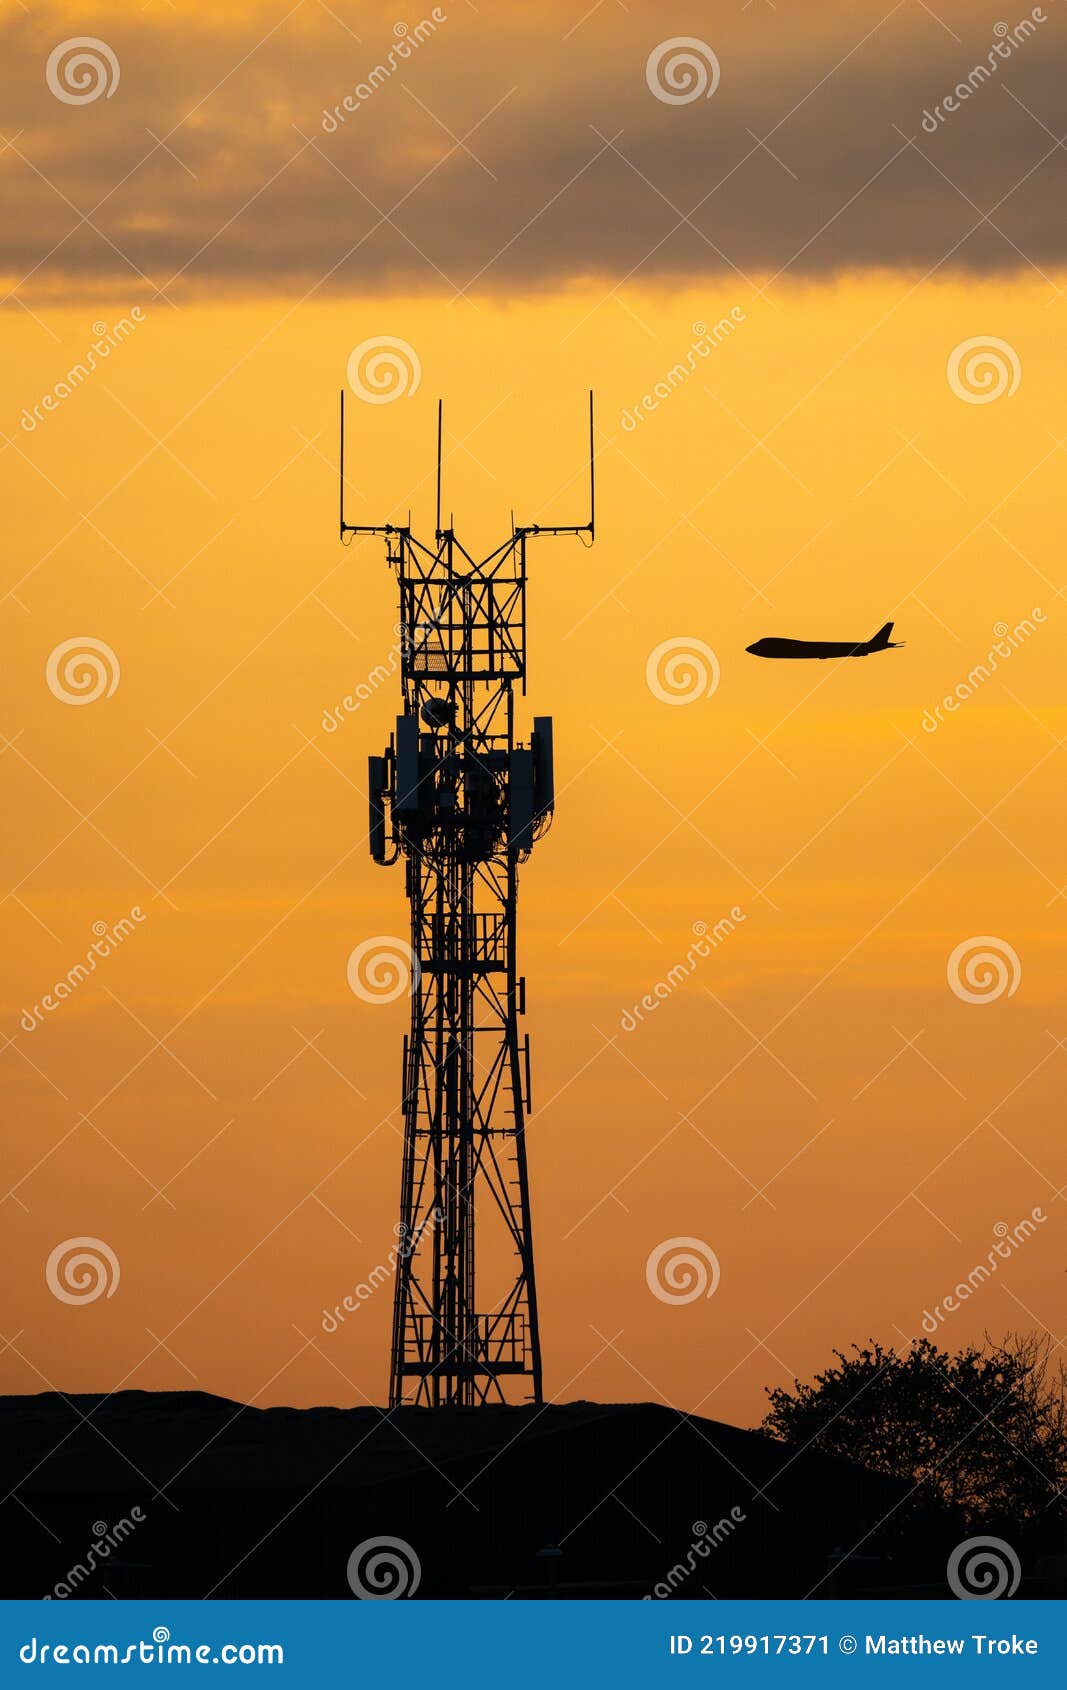 silhouette jumbo jet flying sunset behind high tech radio mast for communications between pilot and airport. air traffic control